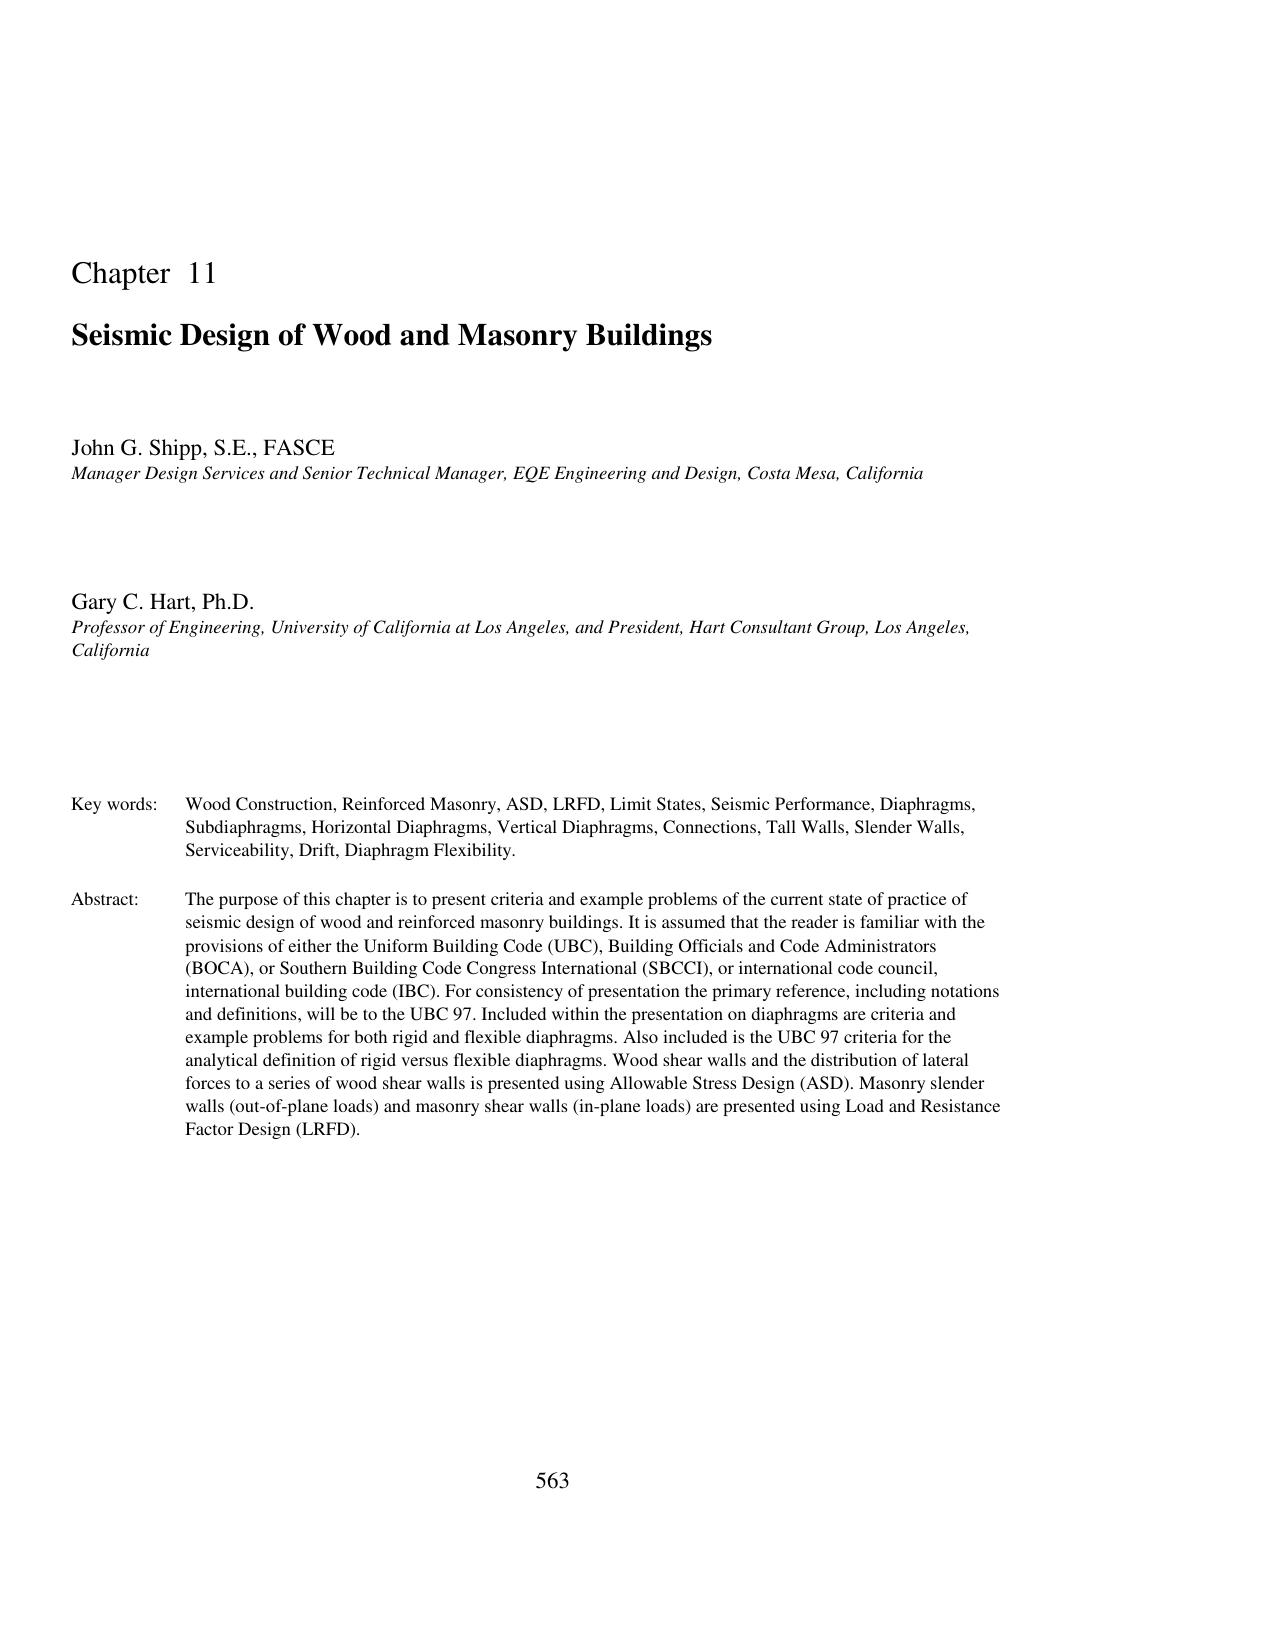 Seismic Design of Wood and Masonry Buildings